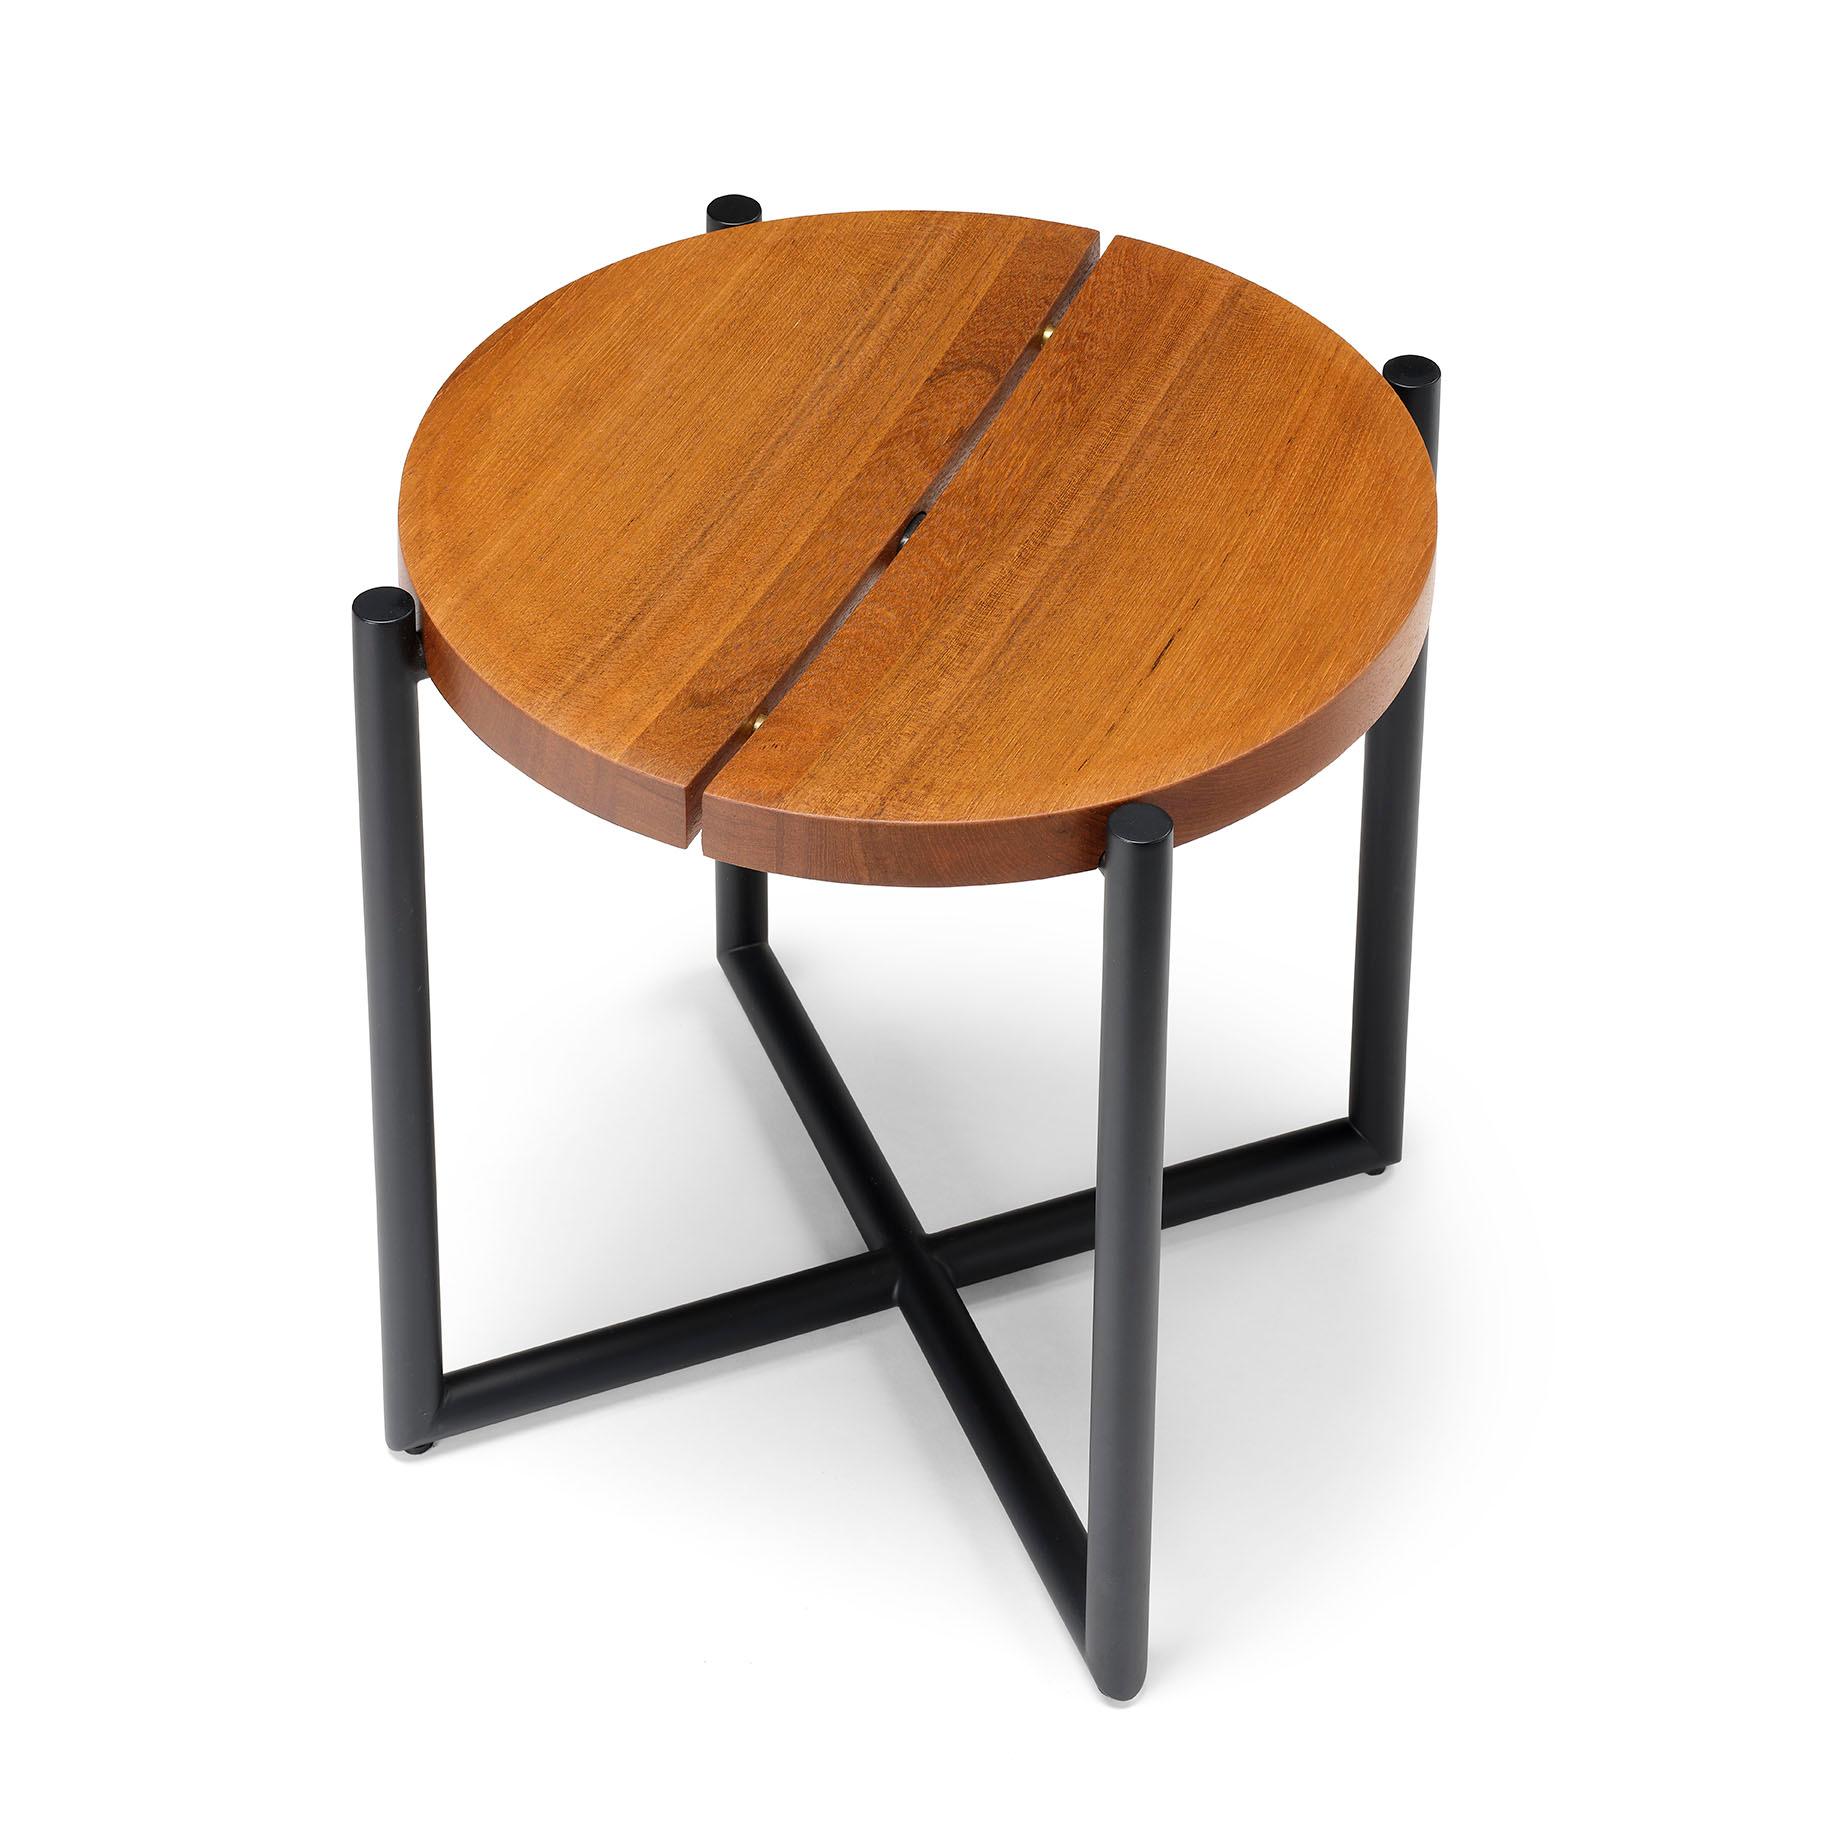 This stool is part of the Madeira Line from Ten10. The stool is made to order. The top is solid plank oiled teak 1 1/4